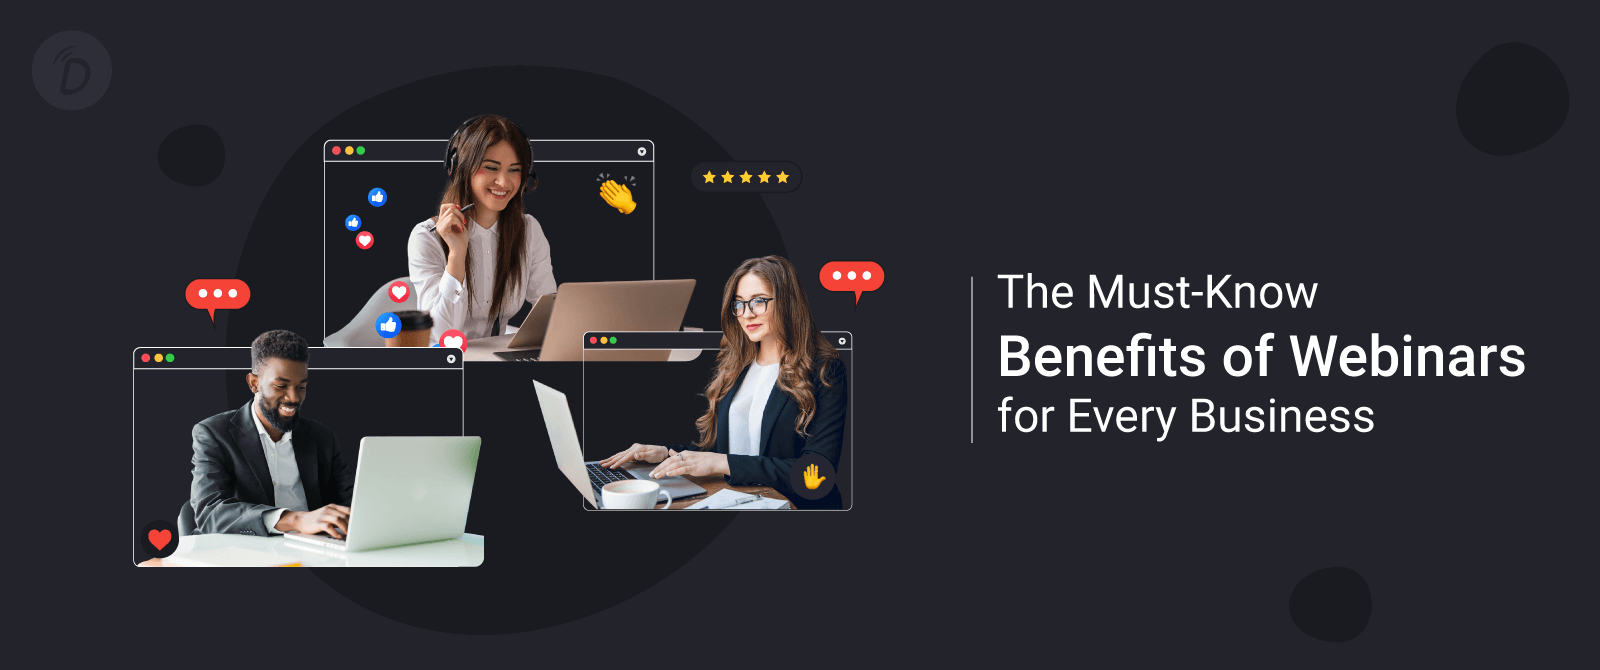 The Must-Know Benefits of Webinars for Every Business